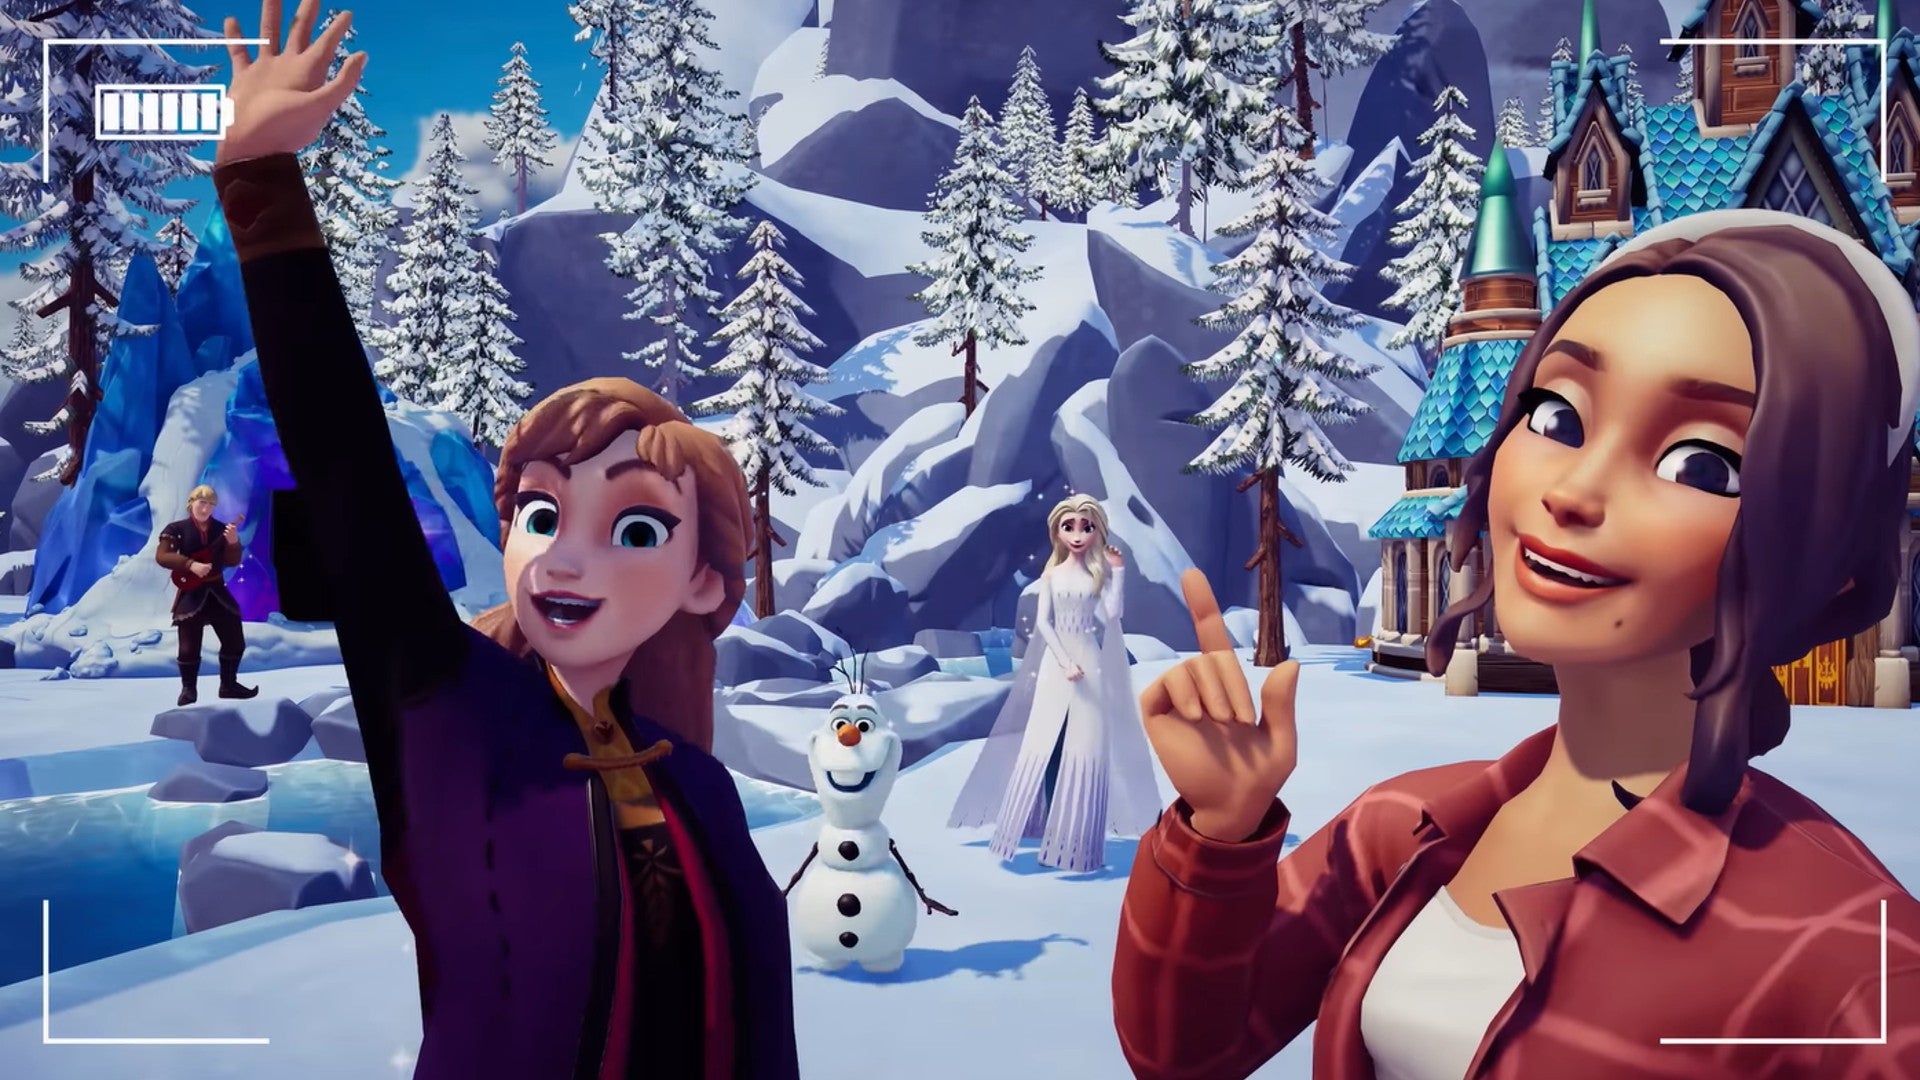 Disney Dreamlight Valley is a free-to-play life sim heading into early access on September 6th, 2022.